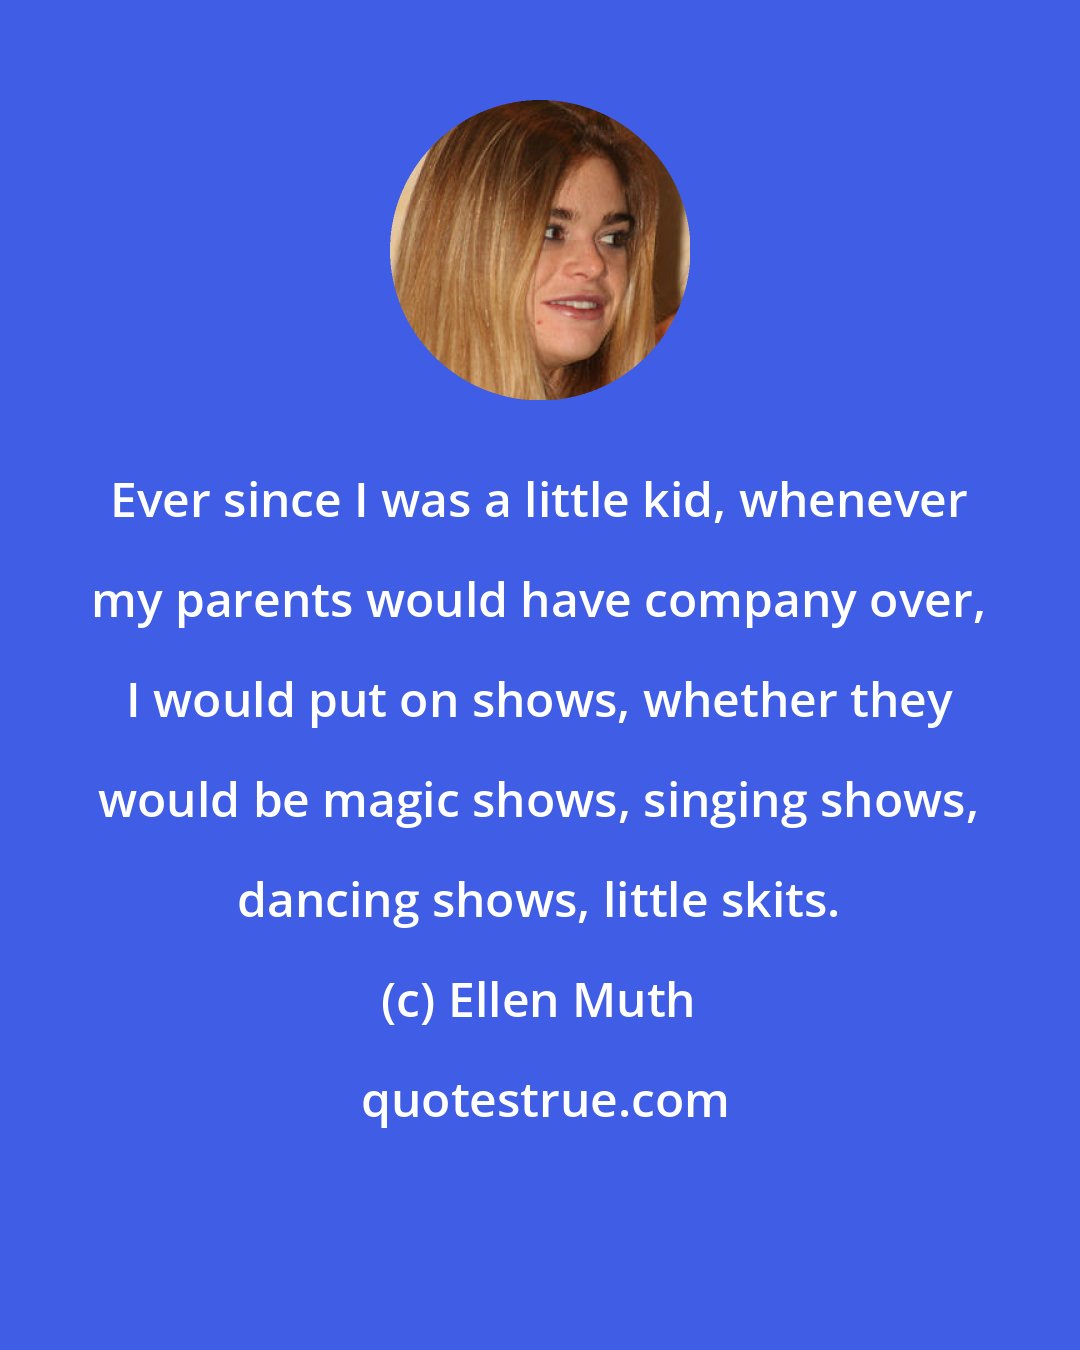 Ellen Muth: Ever since I was a little kid, whenever my parents would have company over, I would put on shows, whether they would be magic shows, singing shows, dancing shows, little skits.